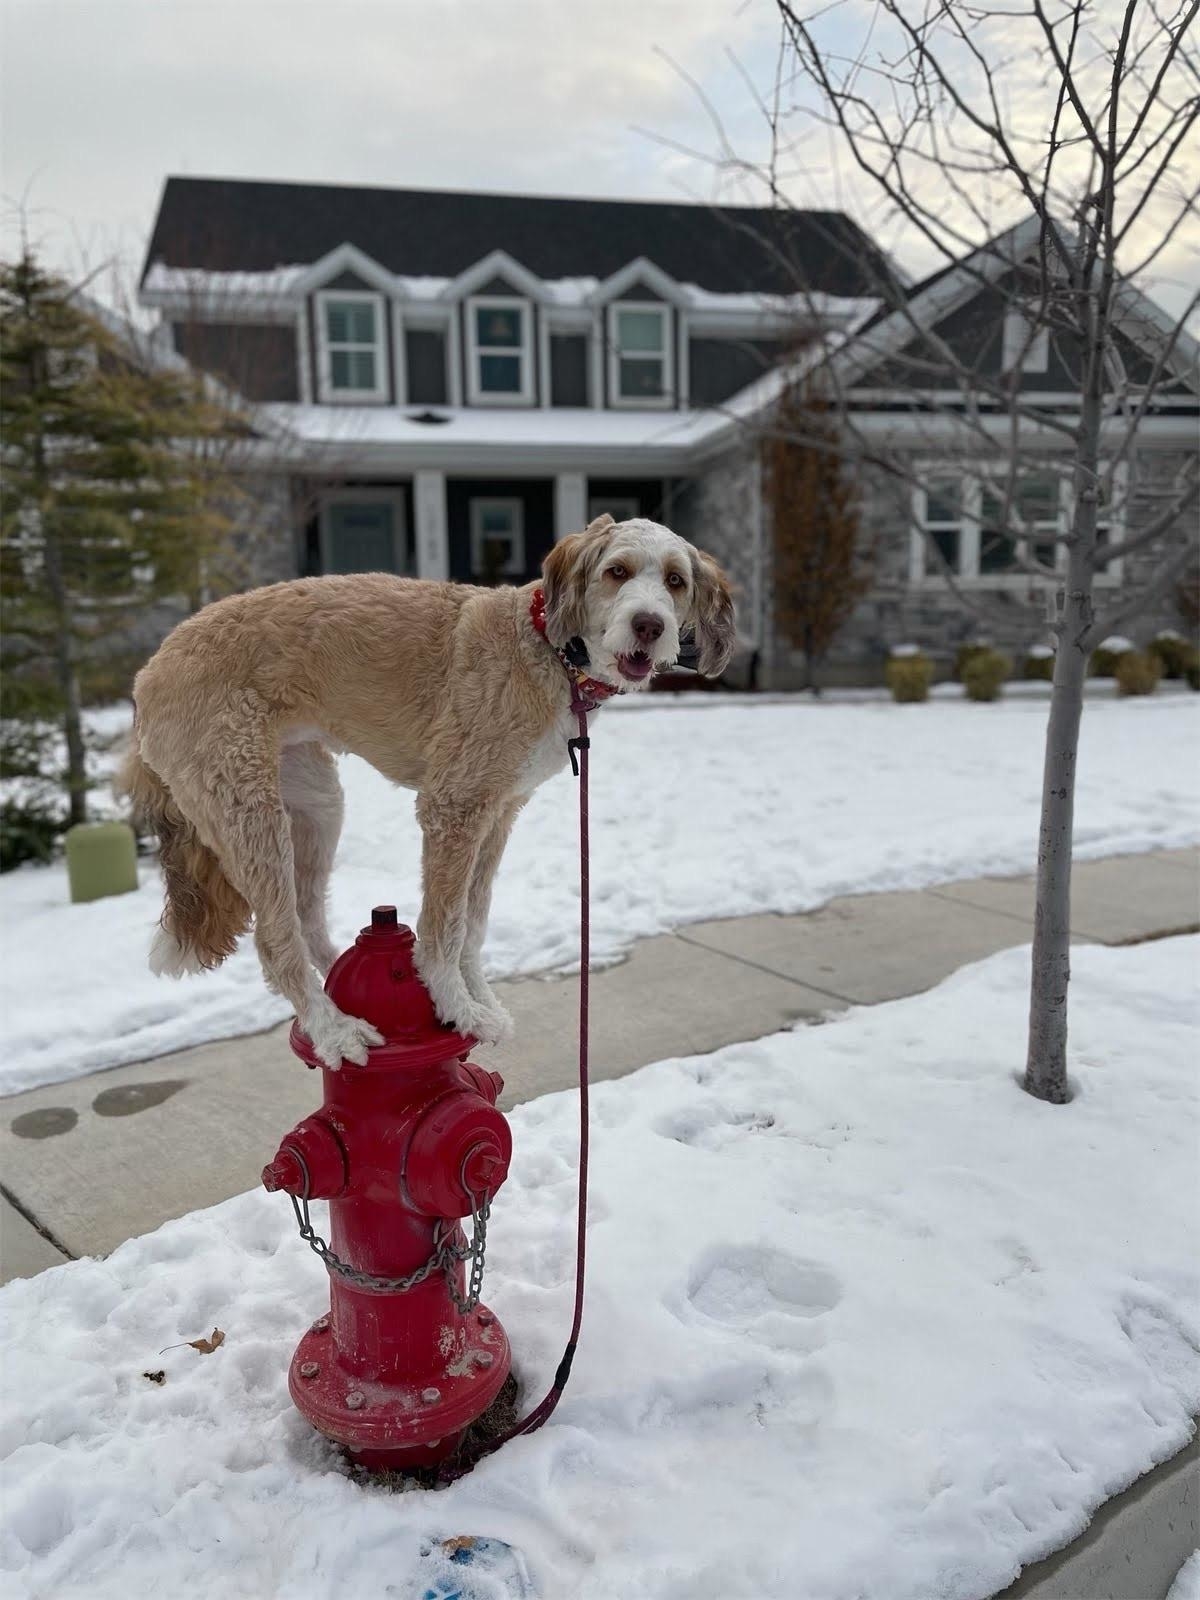 poodle balancing on a fire hydrant